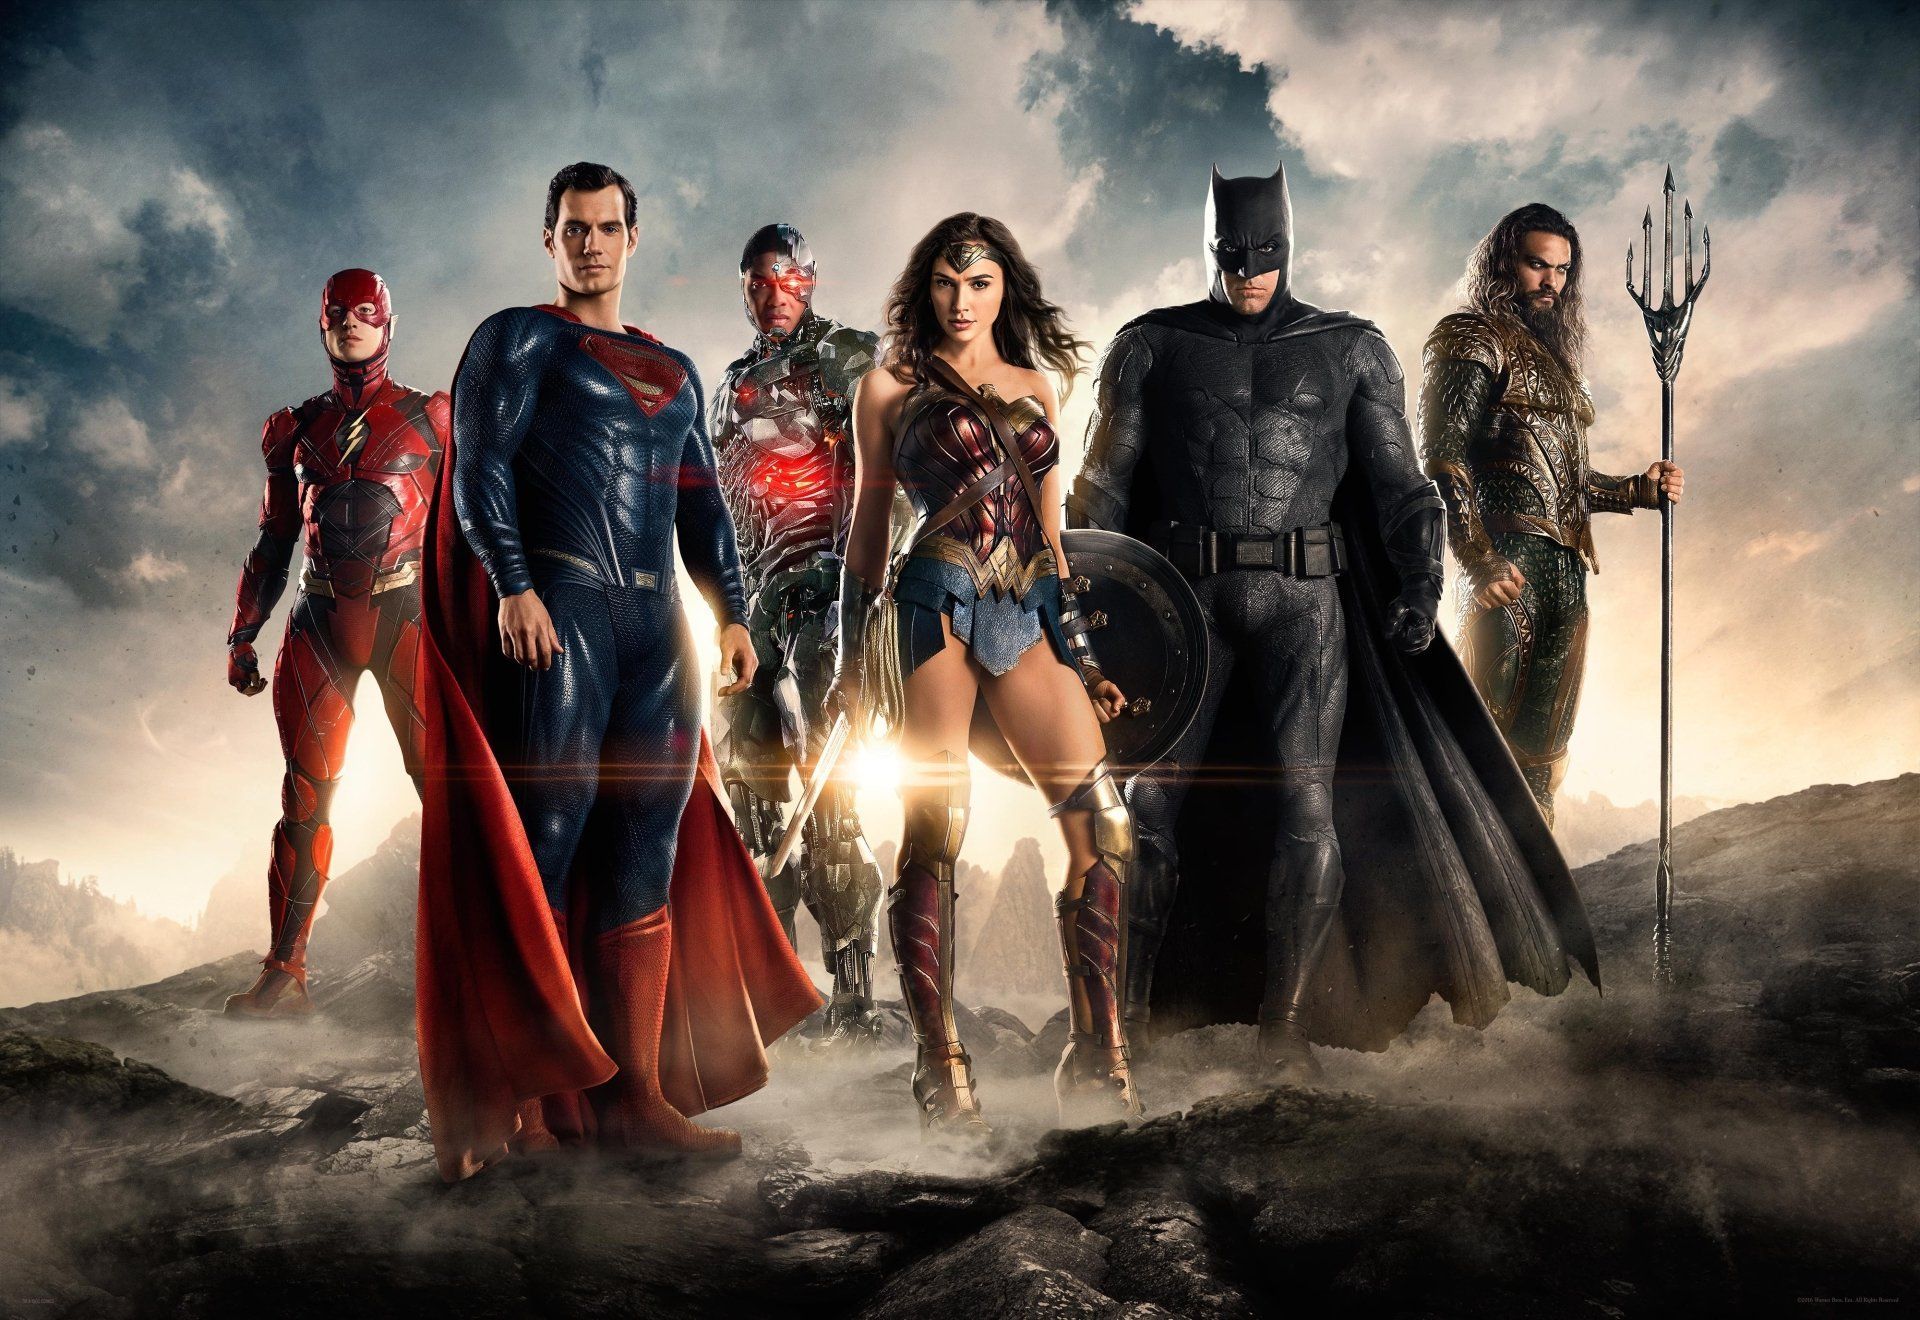 DC Movies Wallpaper Free DC Movies Background